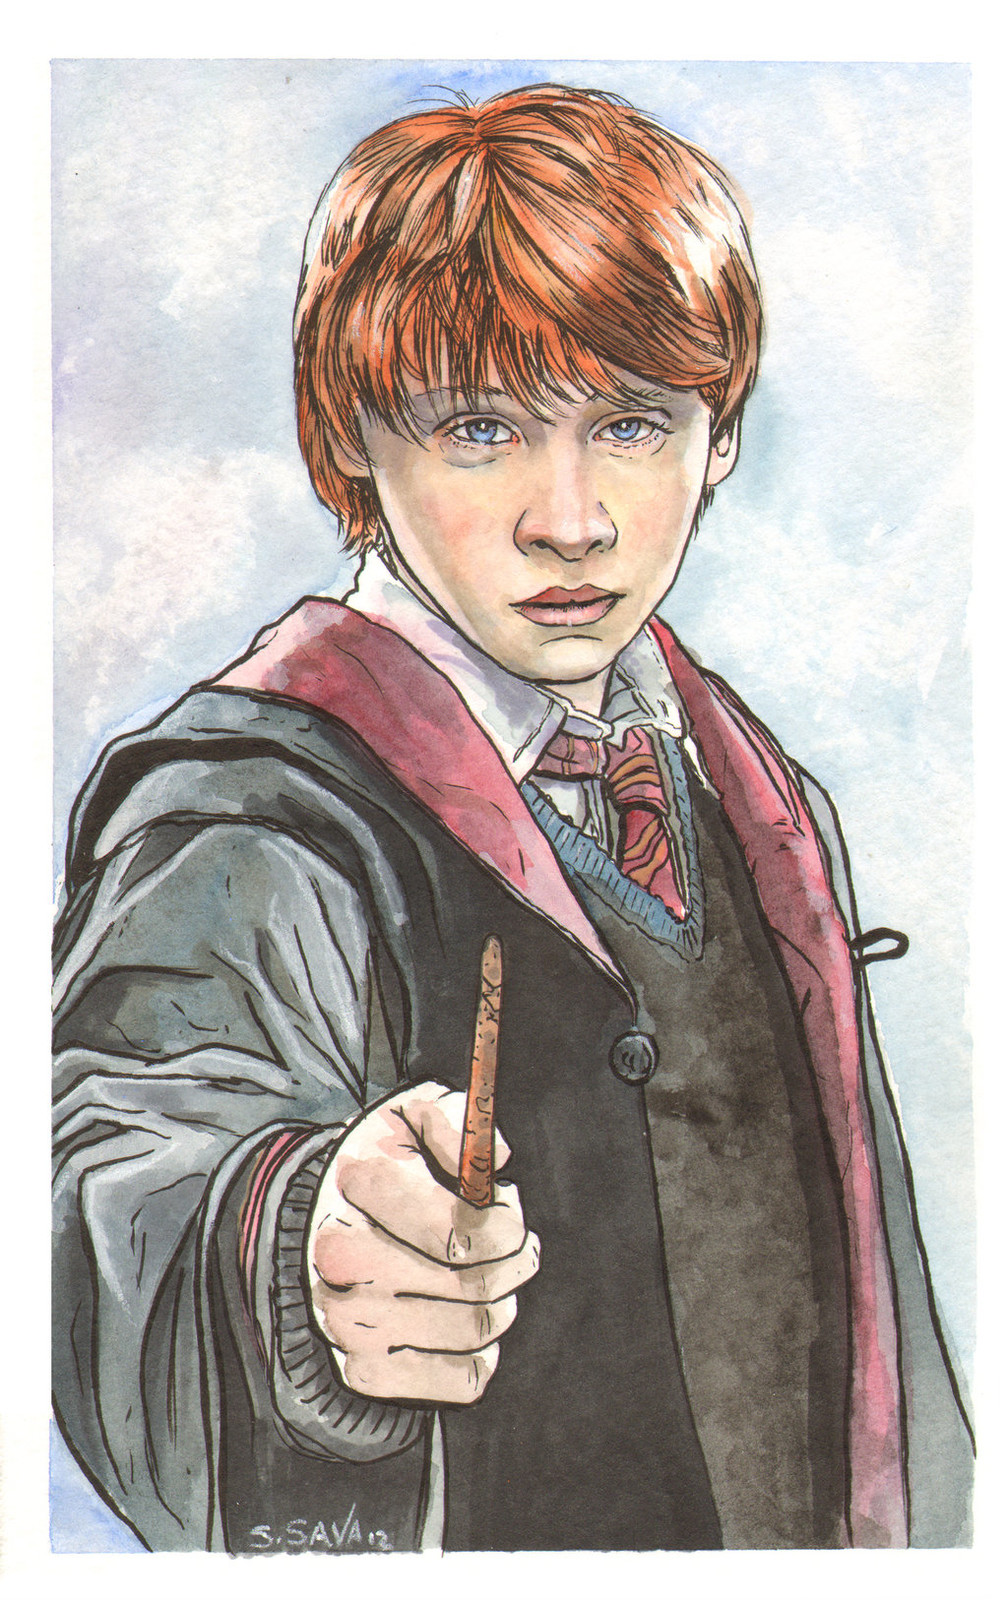 Ron Weasley...

My boys love the Harry Potter books (and the movies we've let them see so far).

Watercolor and ink on 5.5x8.5 inch watercolor paper